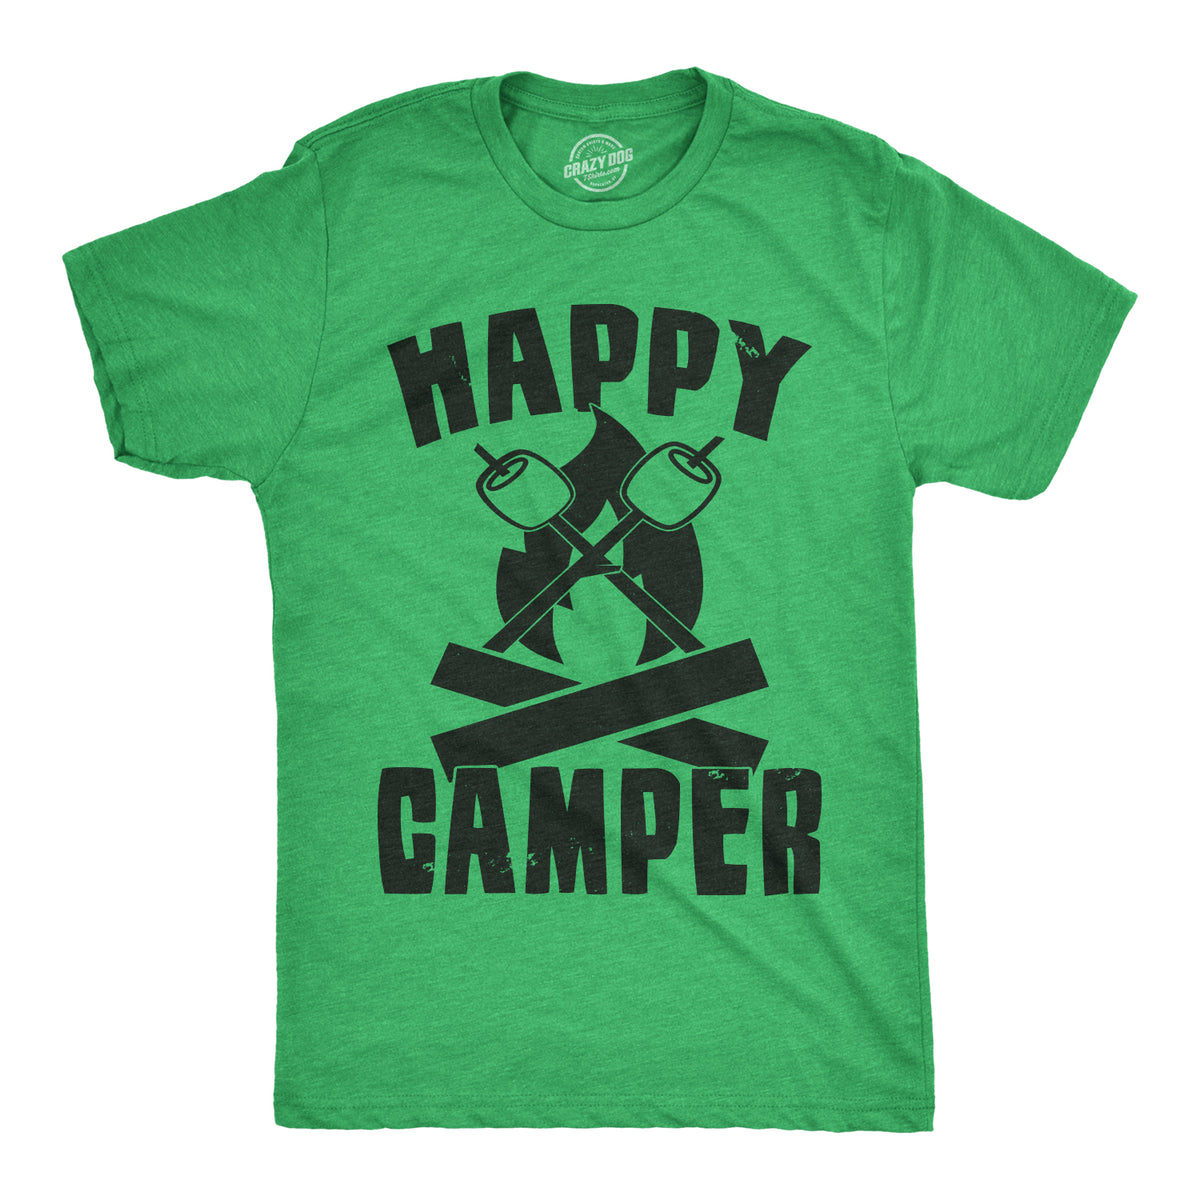 Funny Heather Green - Happy Camper Happy Camper Mens T Shirt Nerdy Camping Retro Tee